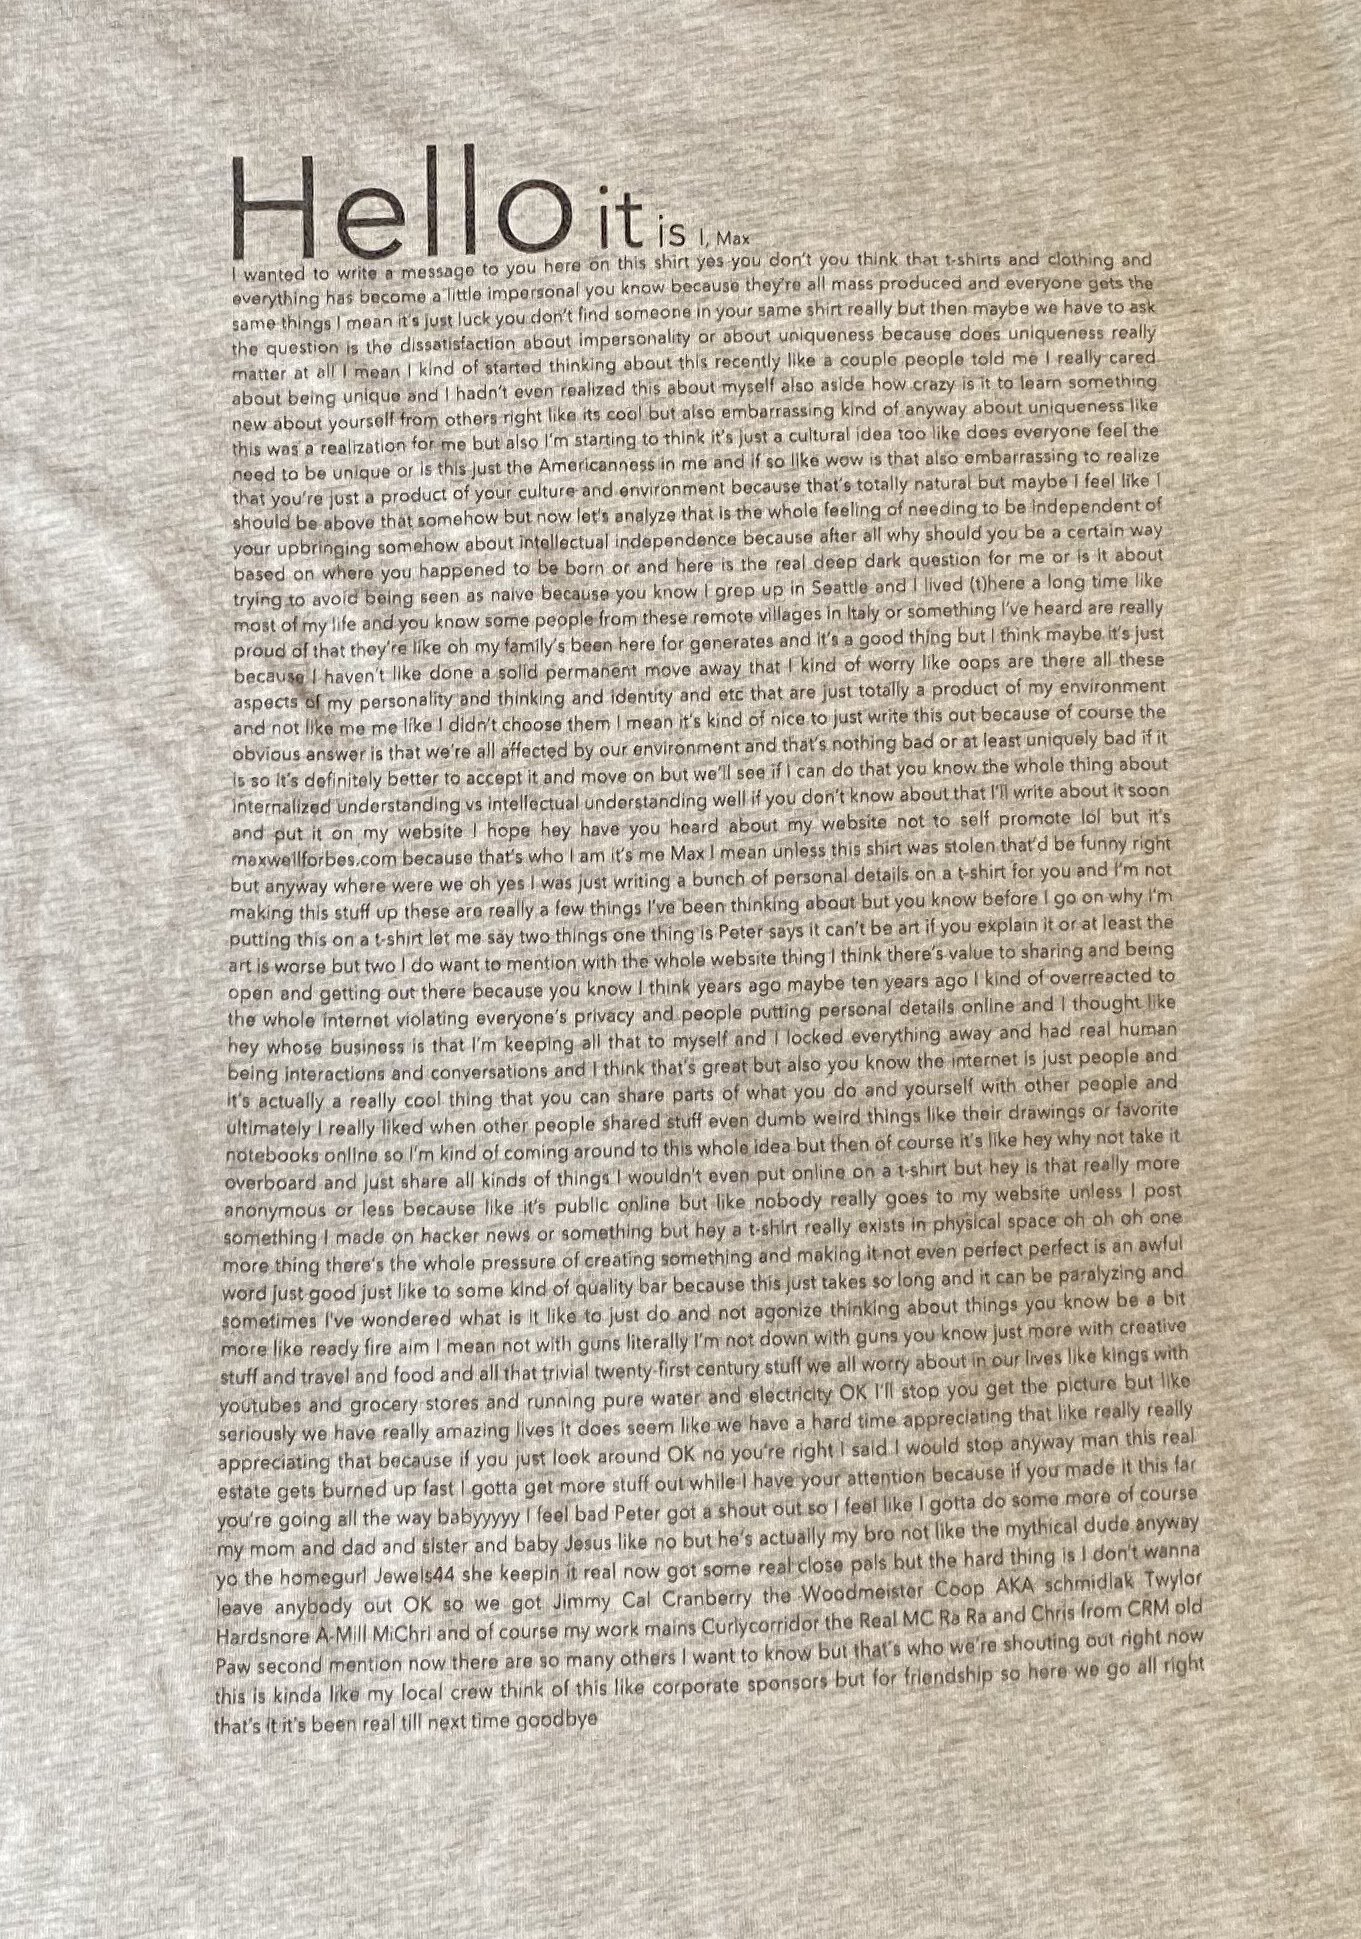 A close-up photo of the new t-shirt I made, featuring a big wall of text in tiny print